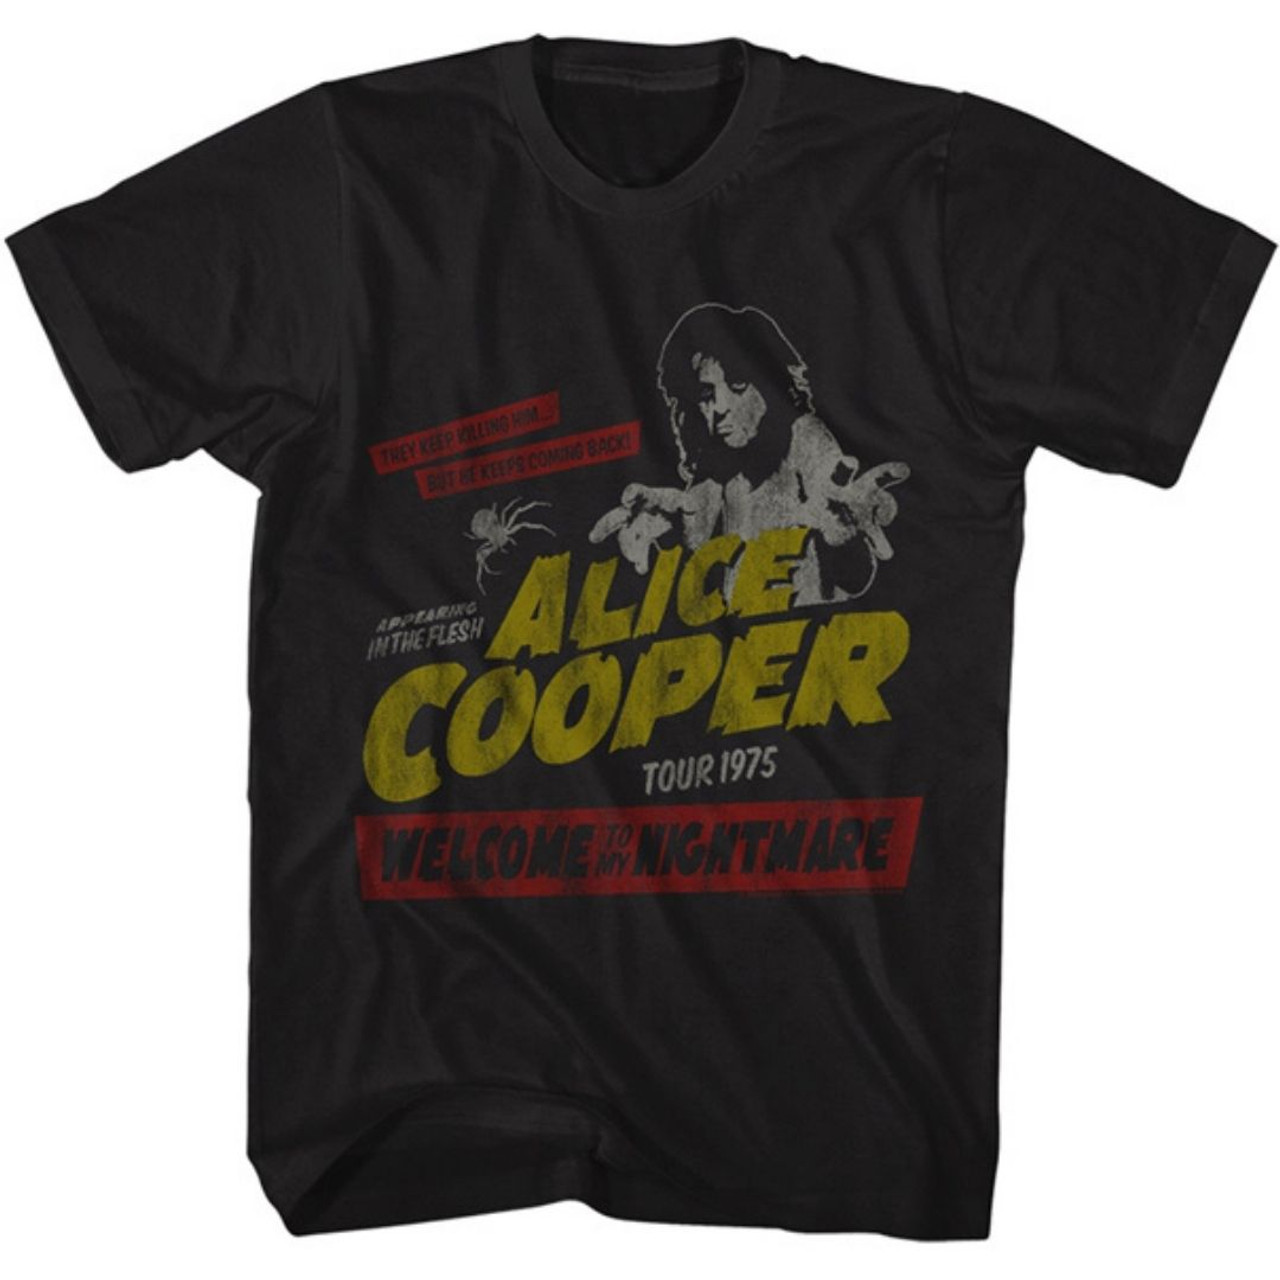 Alice Cooper T-shirt - Welcome To My Nightmare 1975 Tour